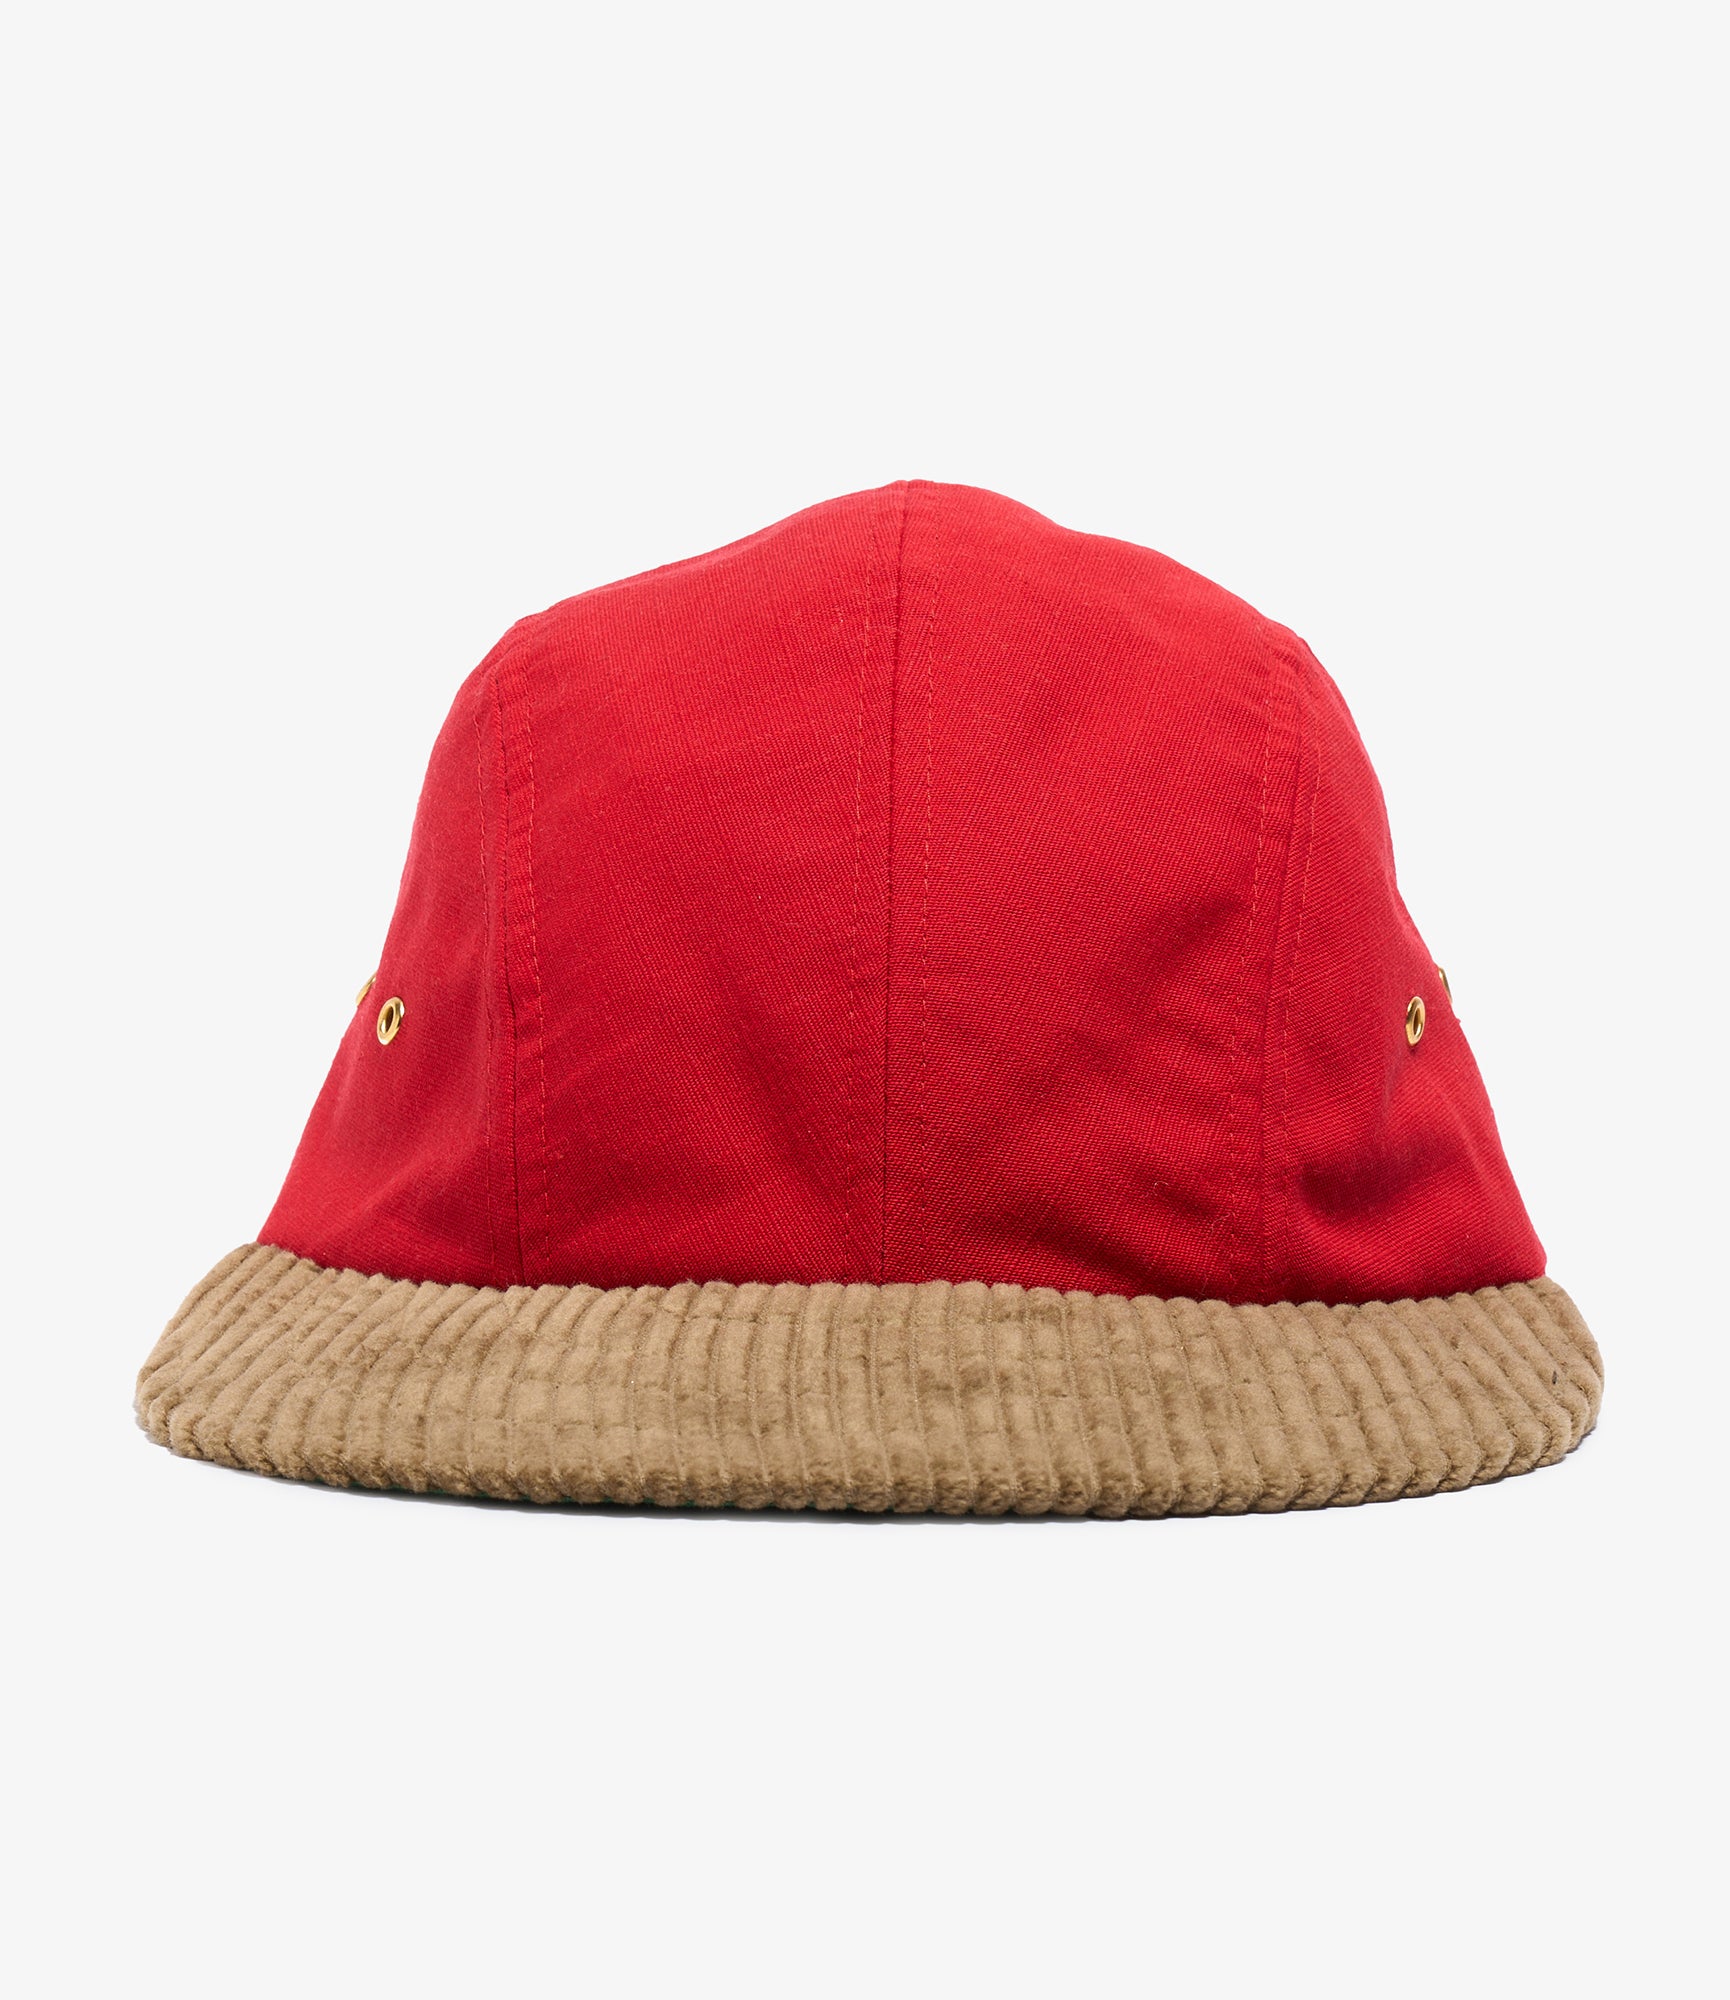 Manager in Training - 4 panel hat - Red / Khaki